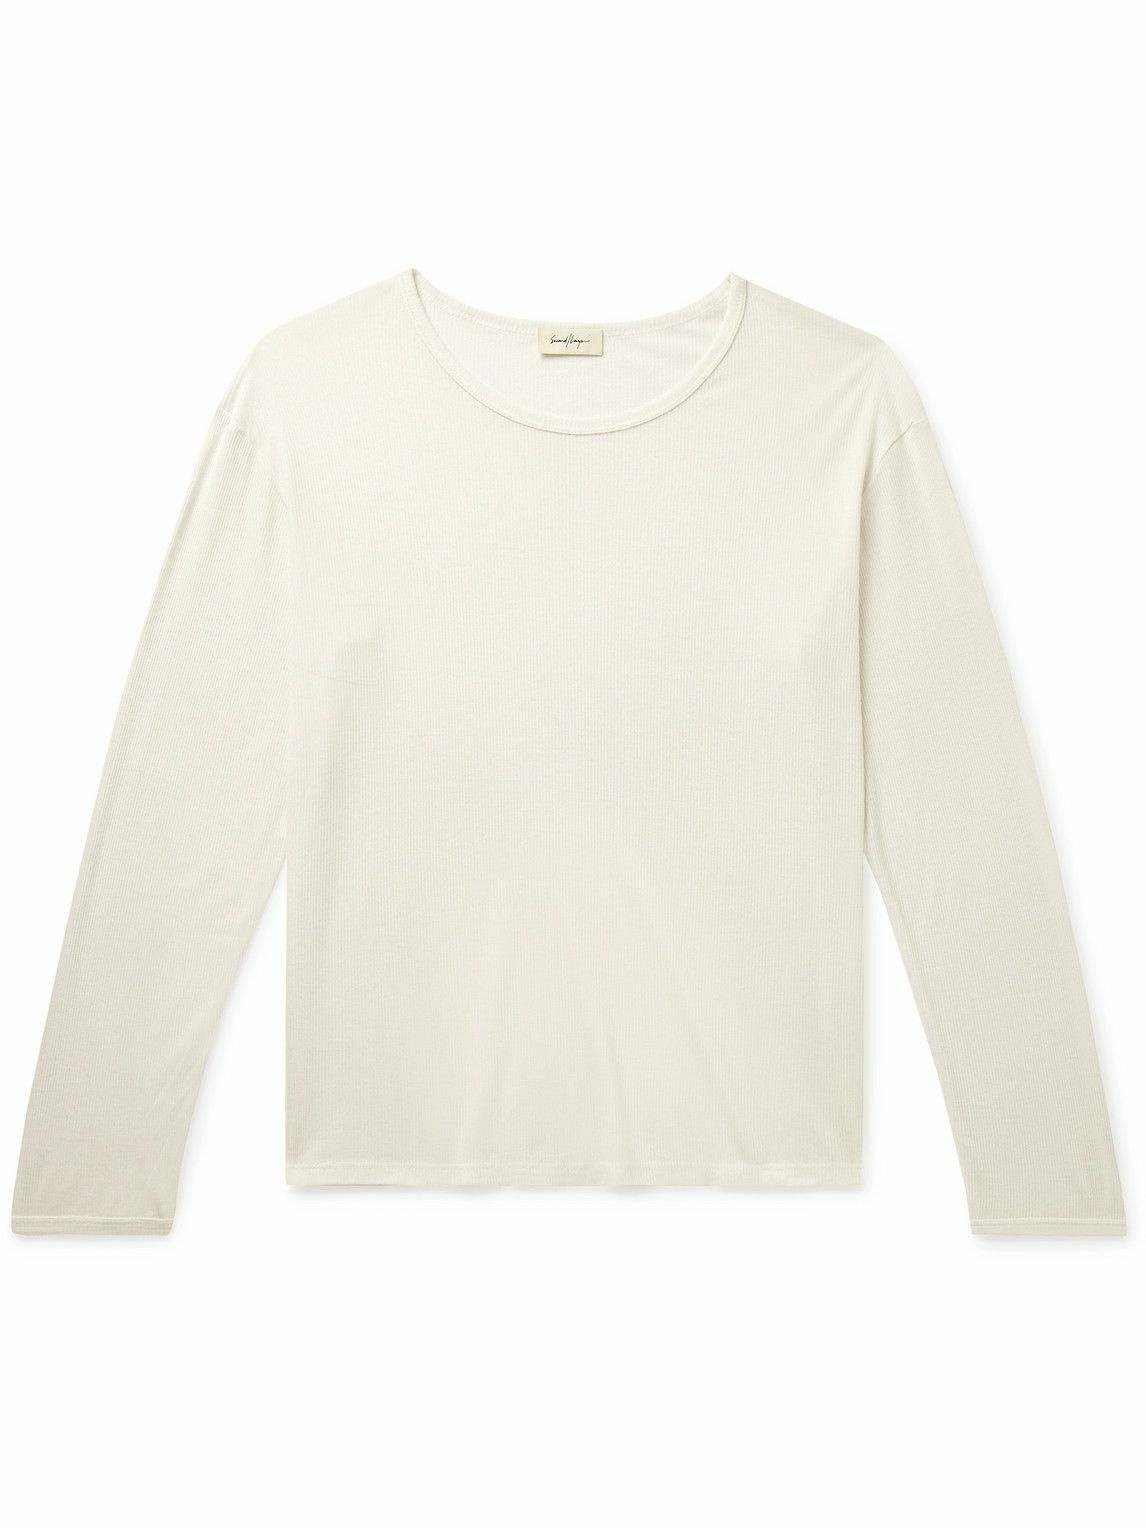 Photo: SECOND / LAYER - Throwing Fits Dias Cortas Ribbed TENCEL™ and Wool-Blend Jersey T-Shirt - White